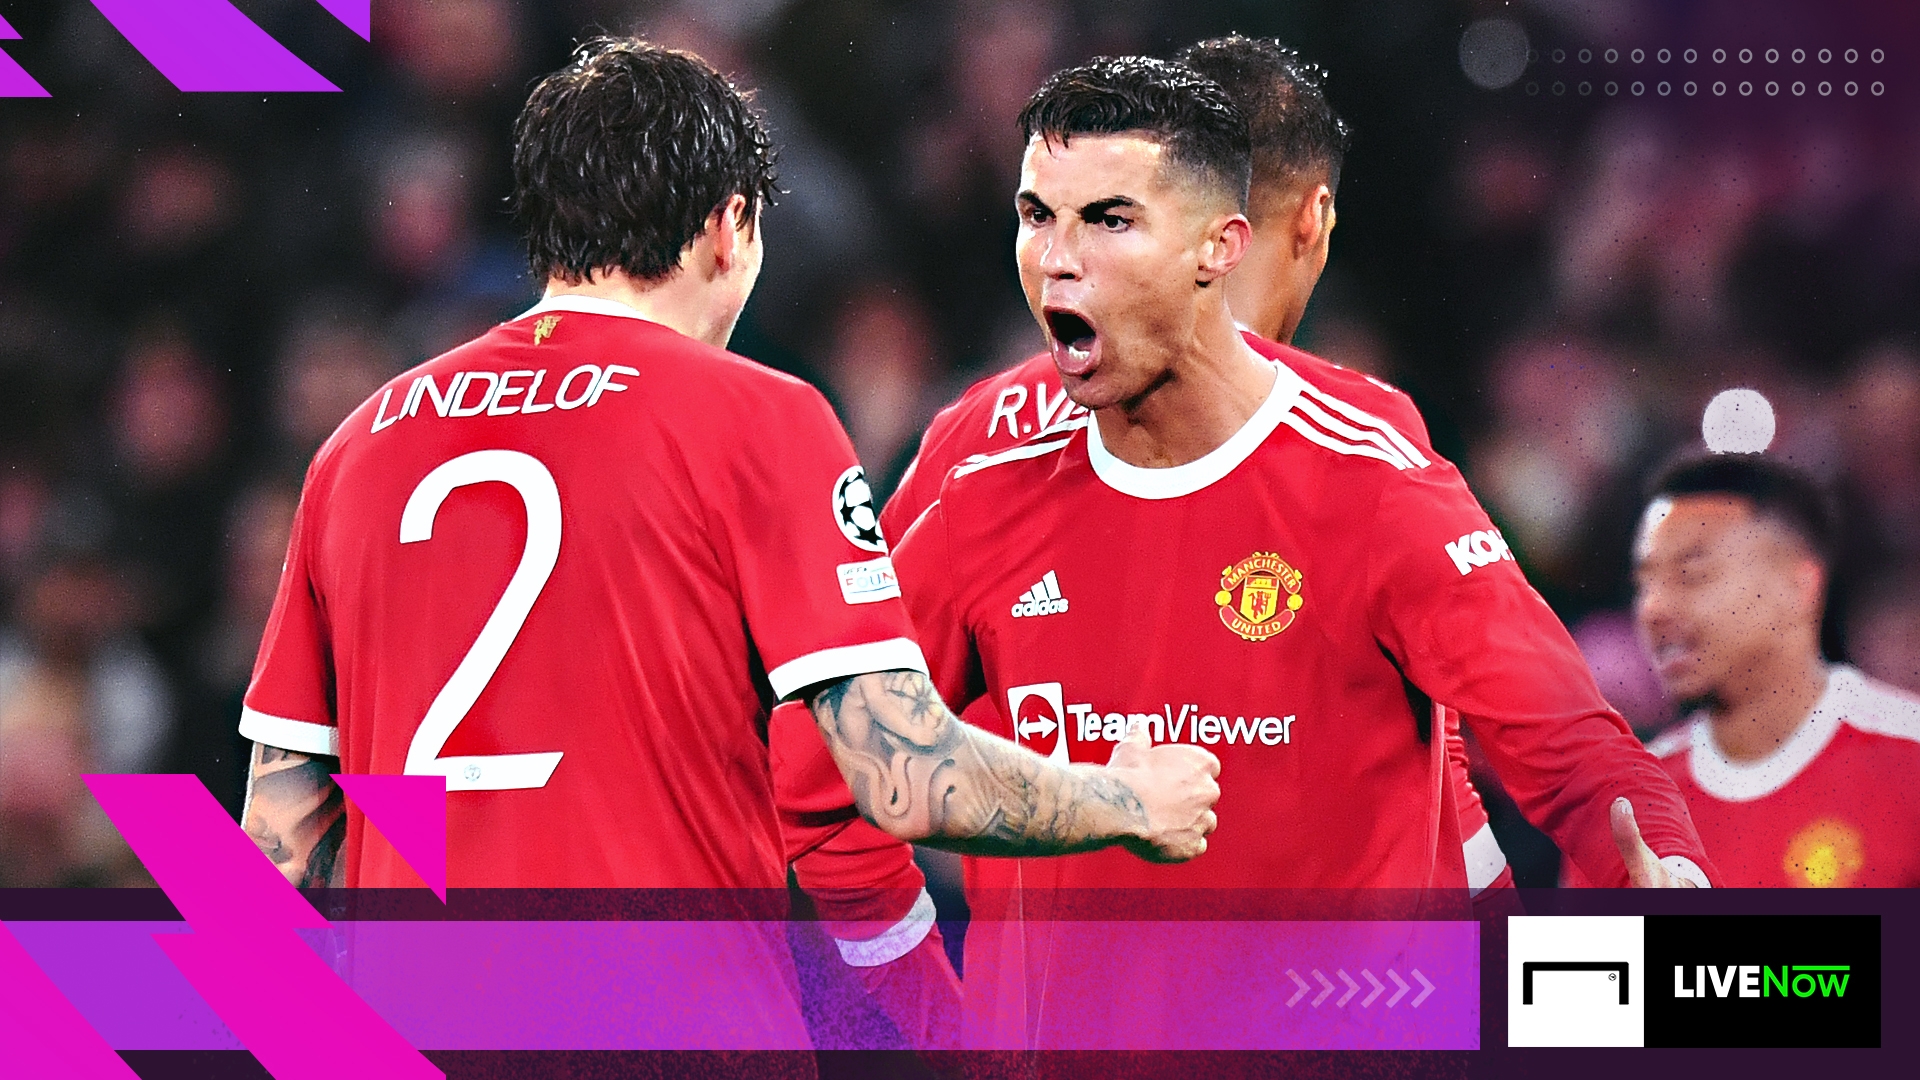 Watch Leicester vs Manchester United on LIVENow